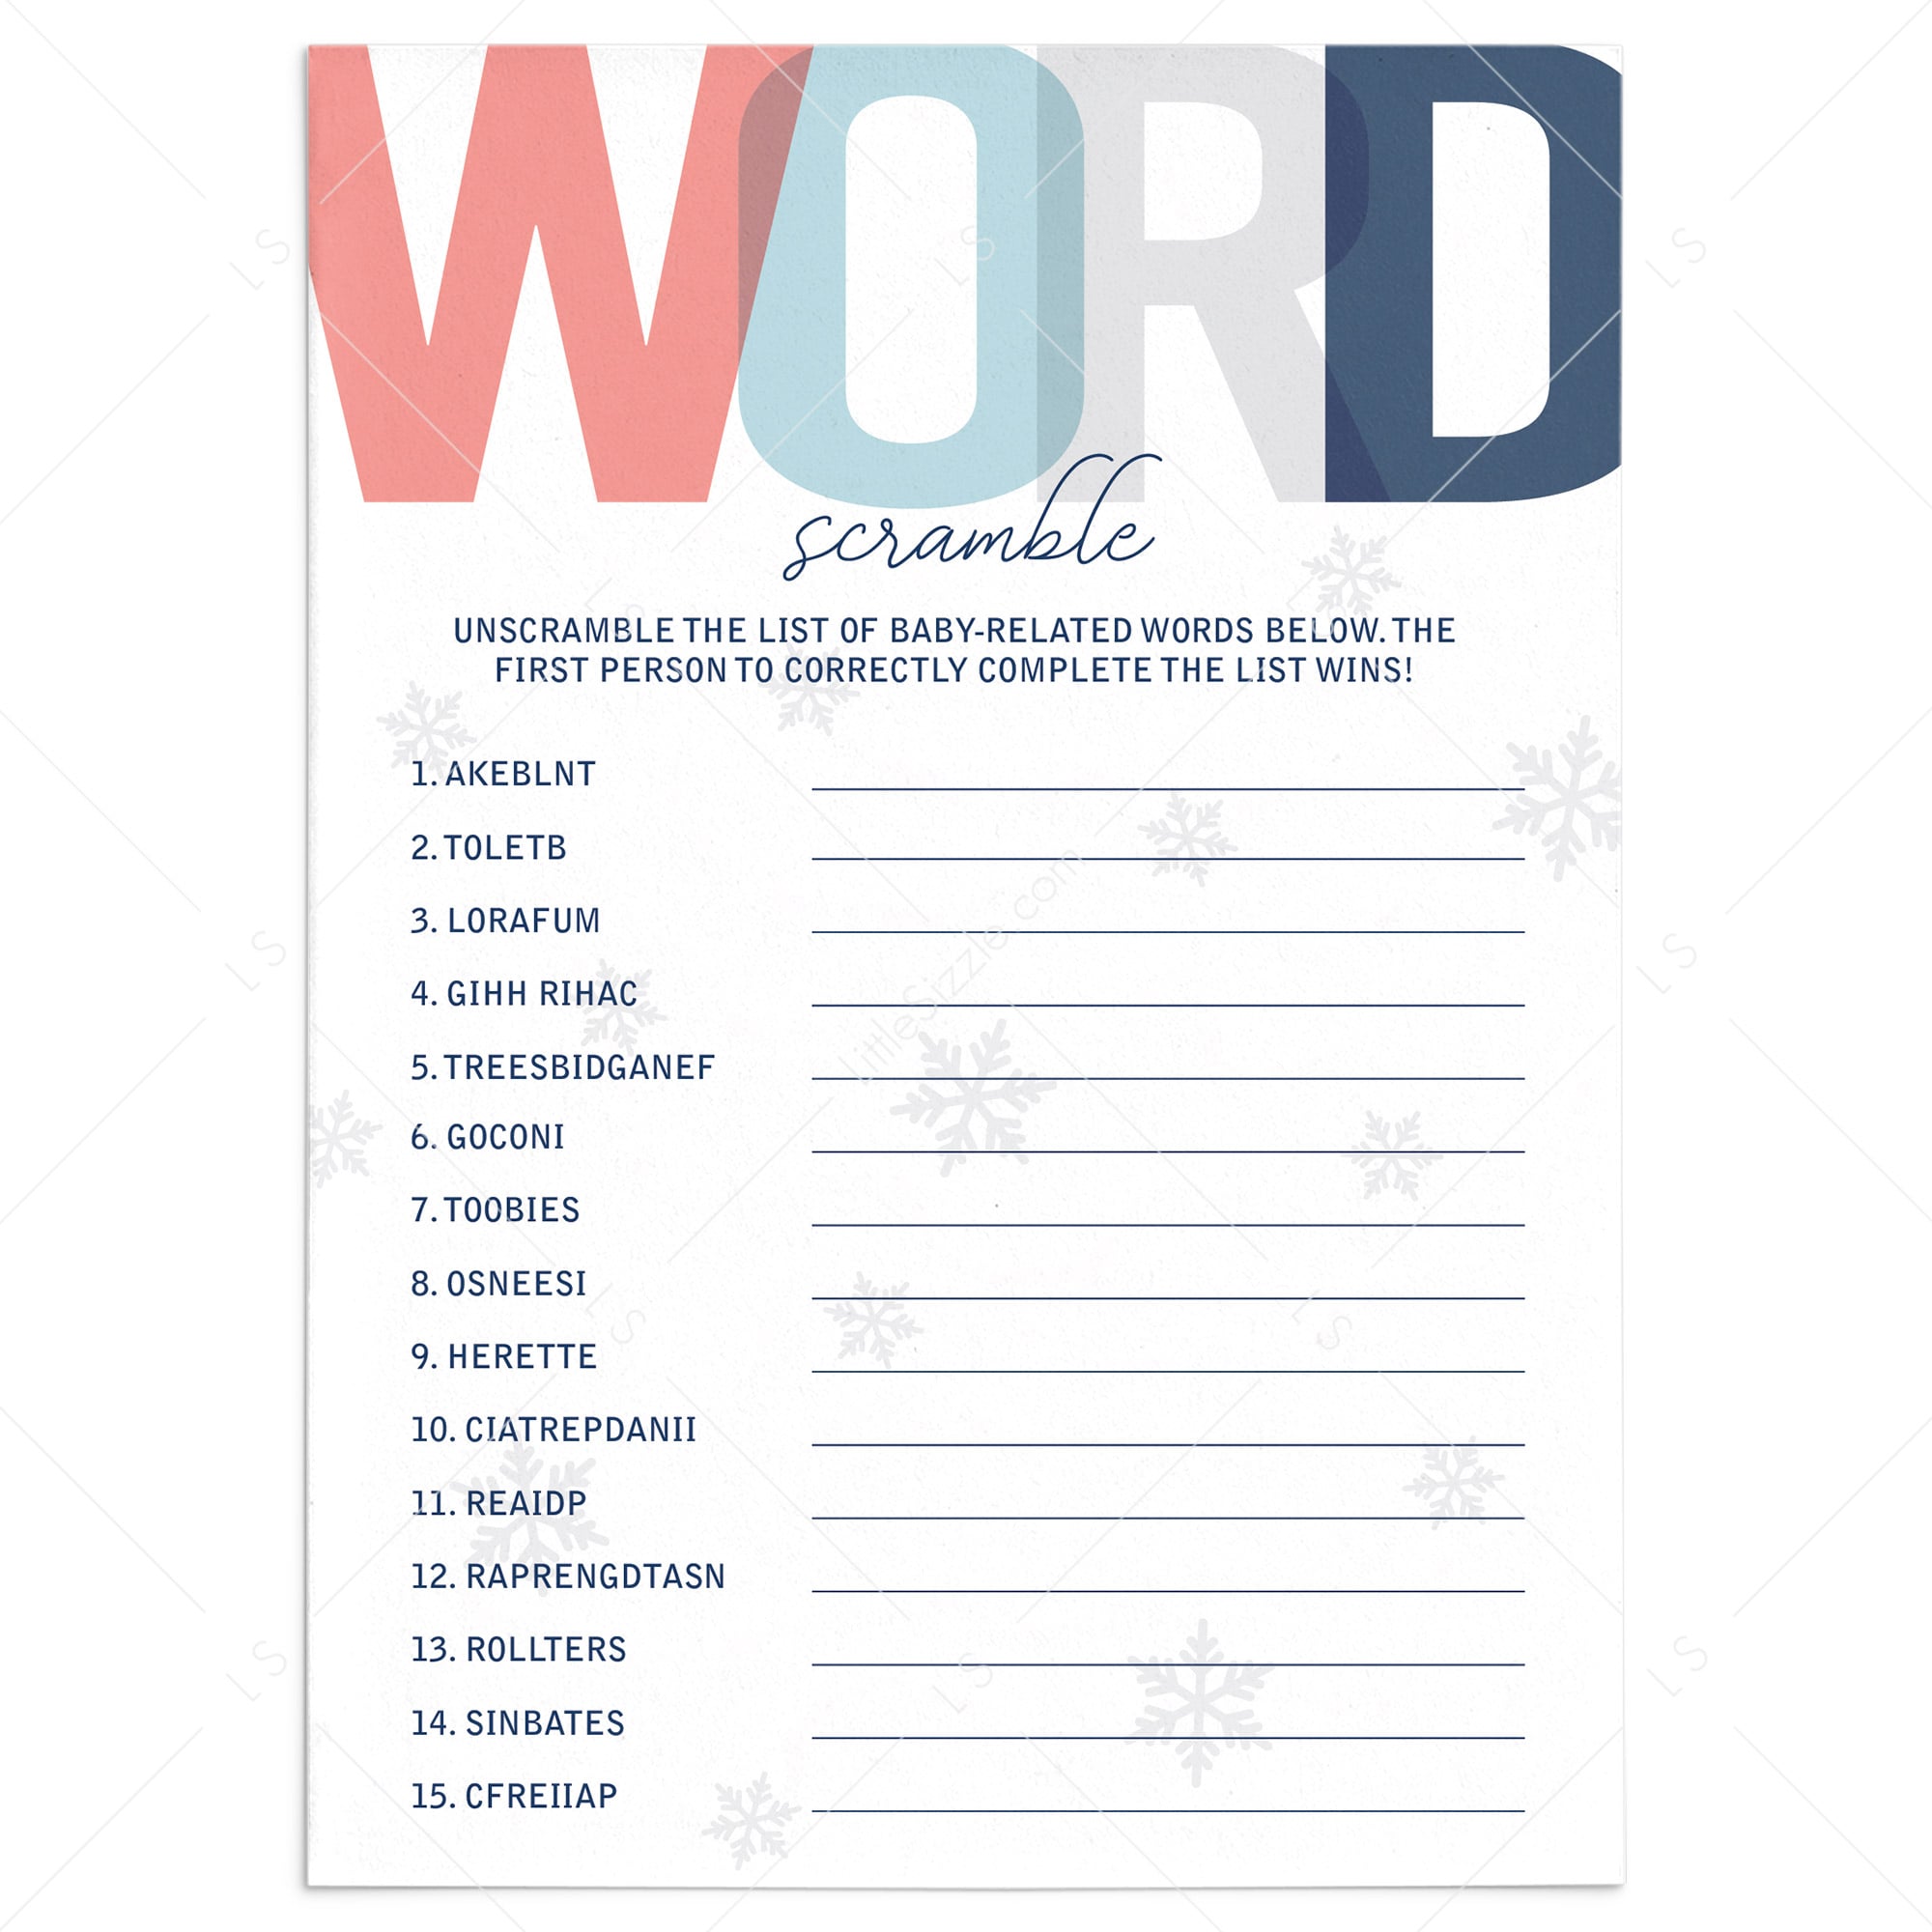 Printable baby word scramble for winter shower by LittleSizzle